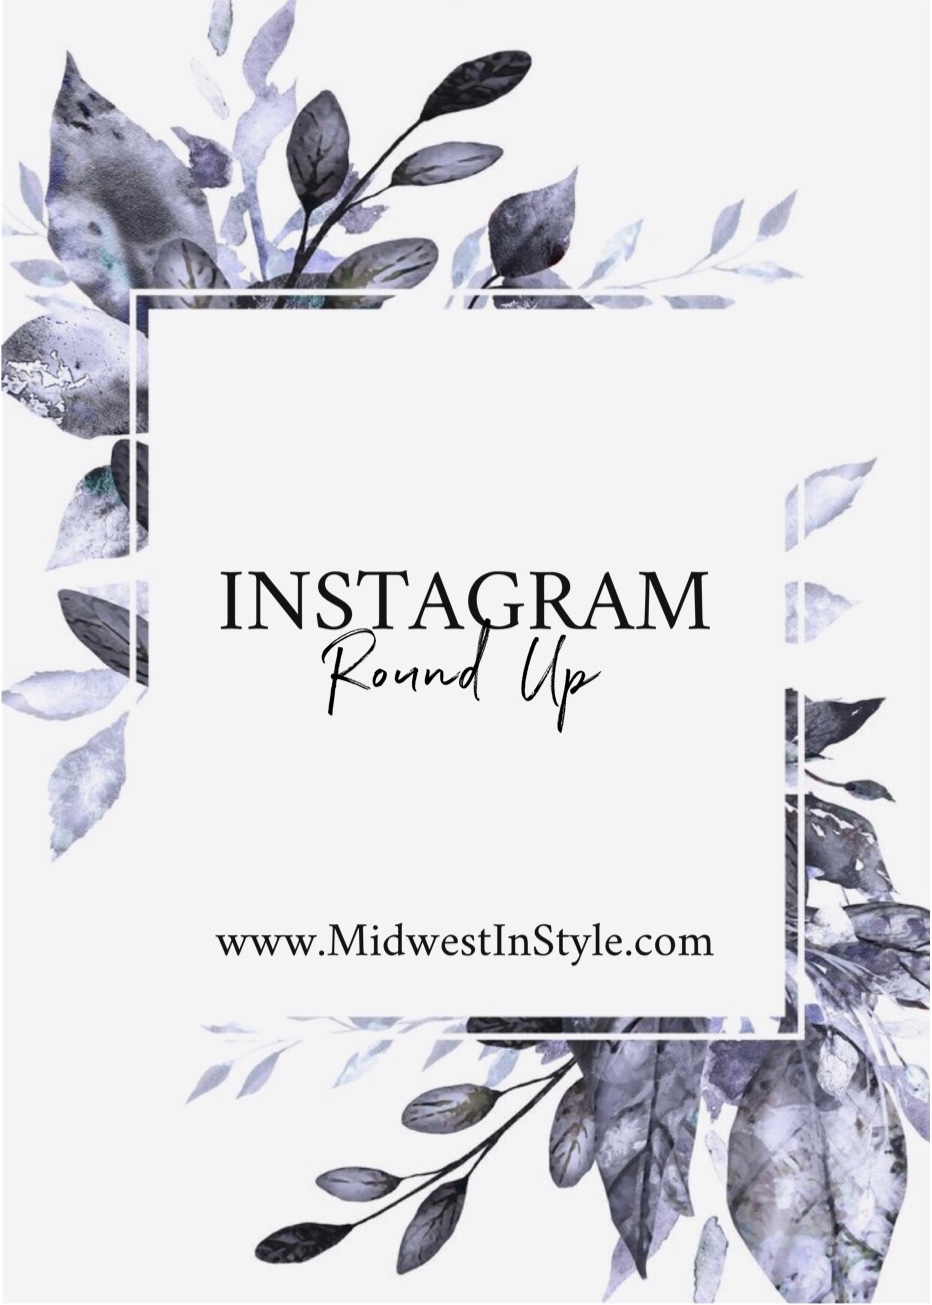 Instagram Round Up - May 2019 - Midwest In Style